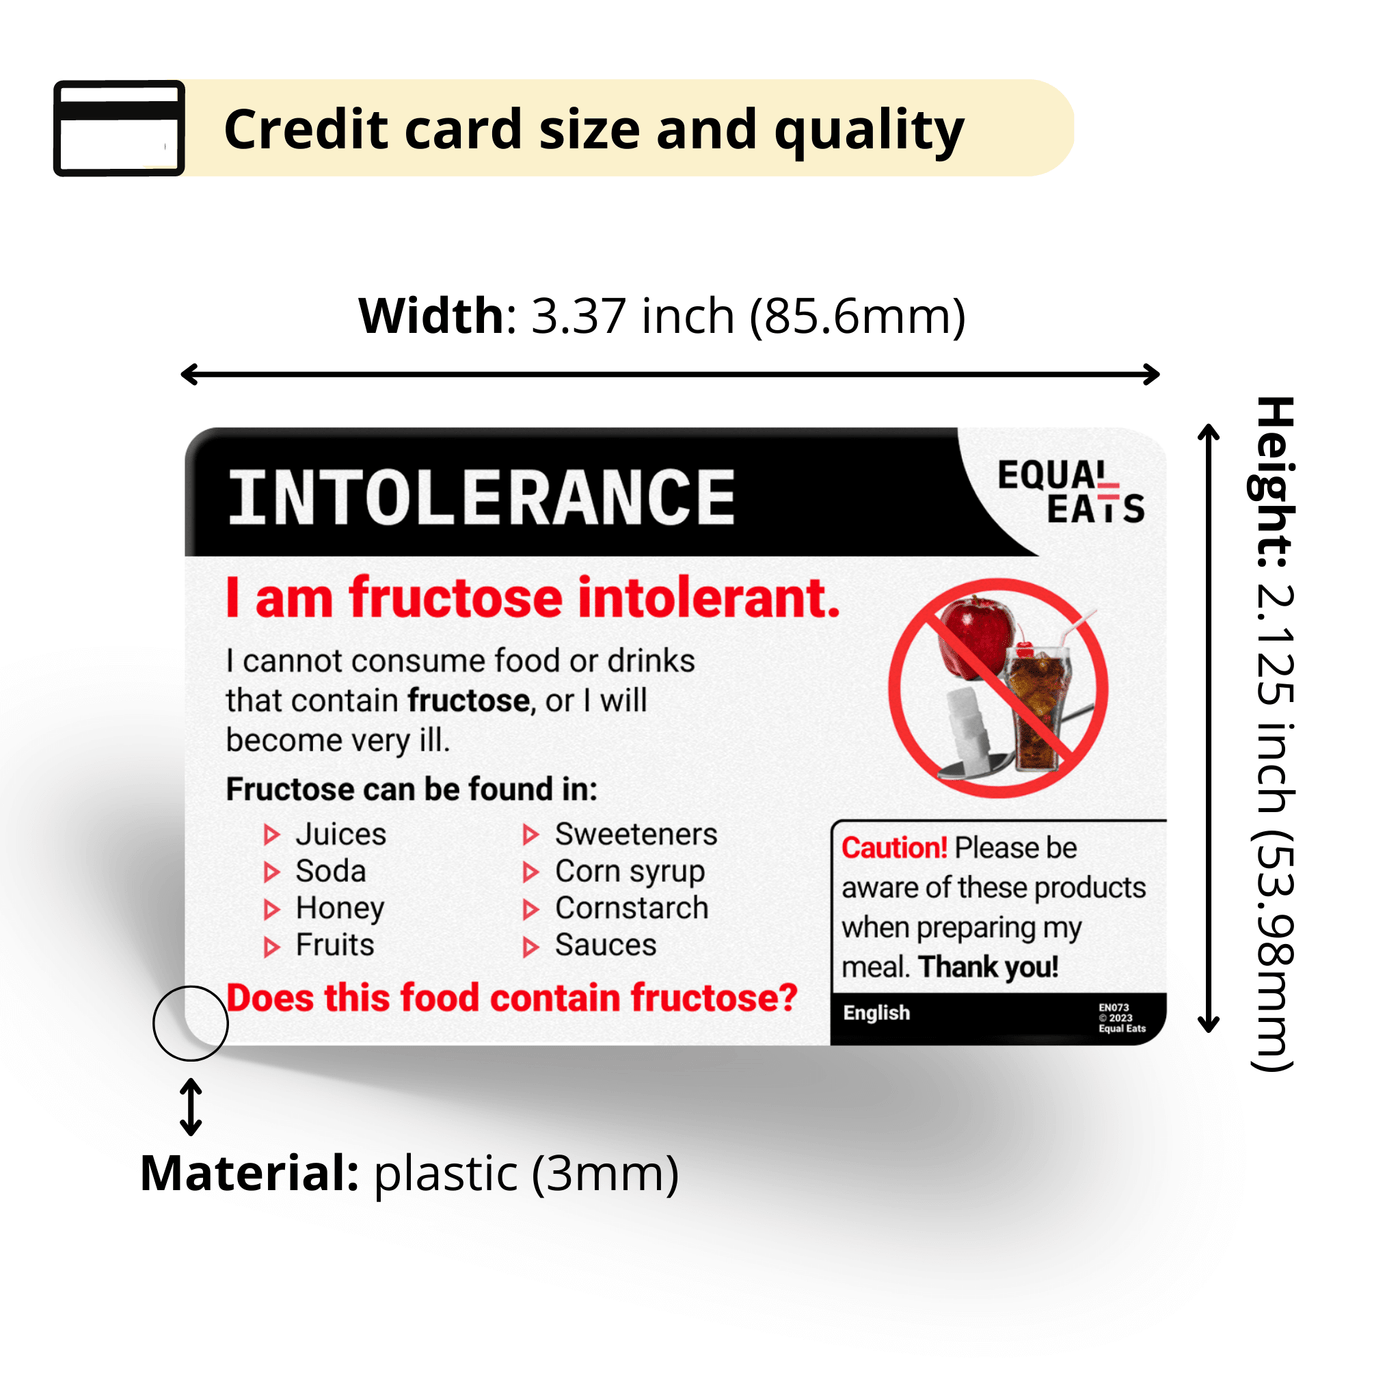 Equal Eats Dietary Translation Card Fructose Intolerance